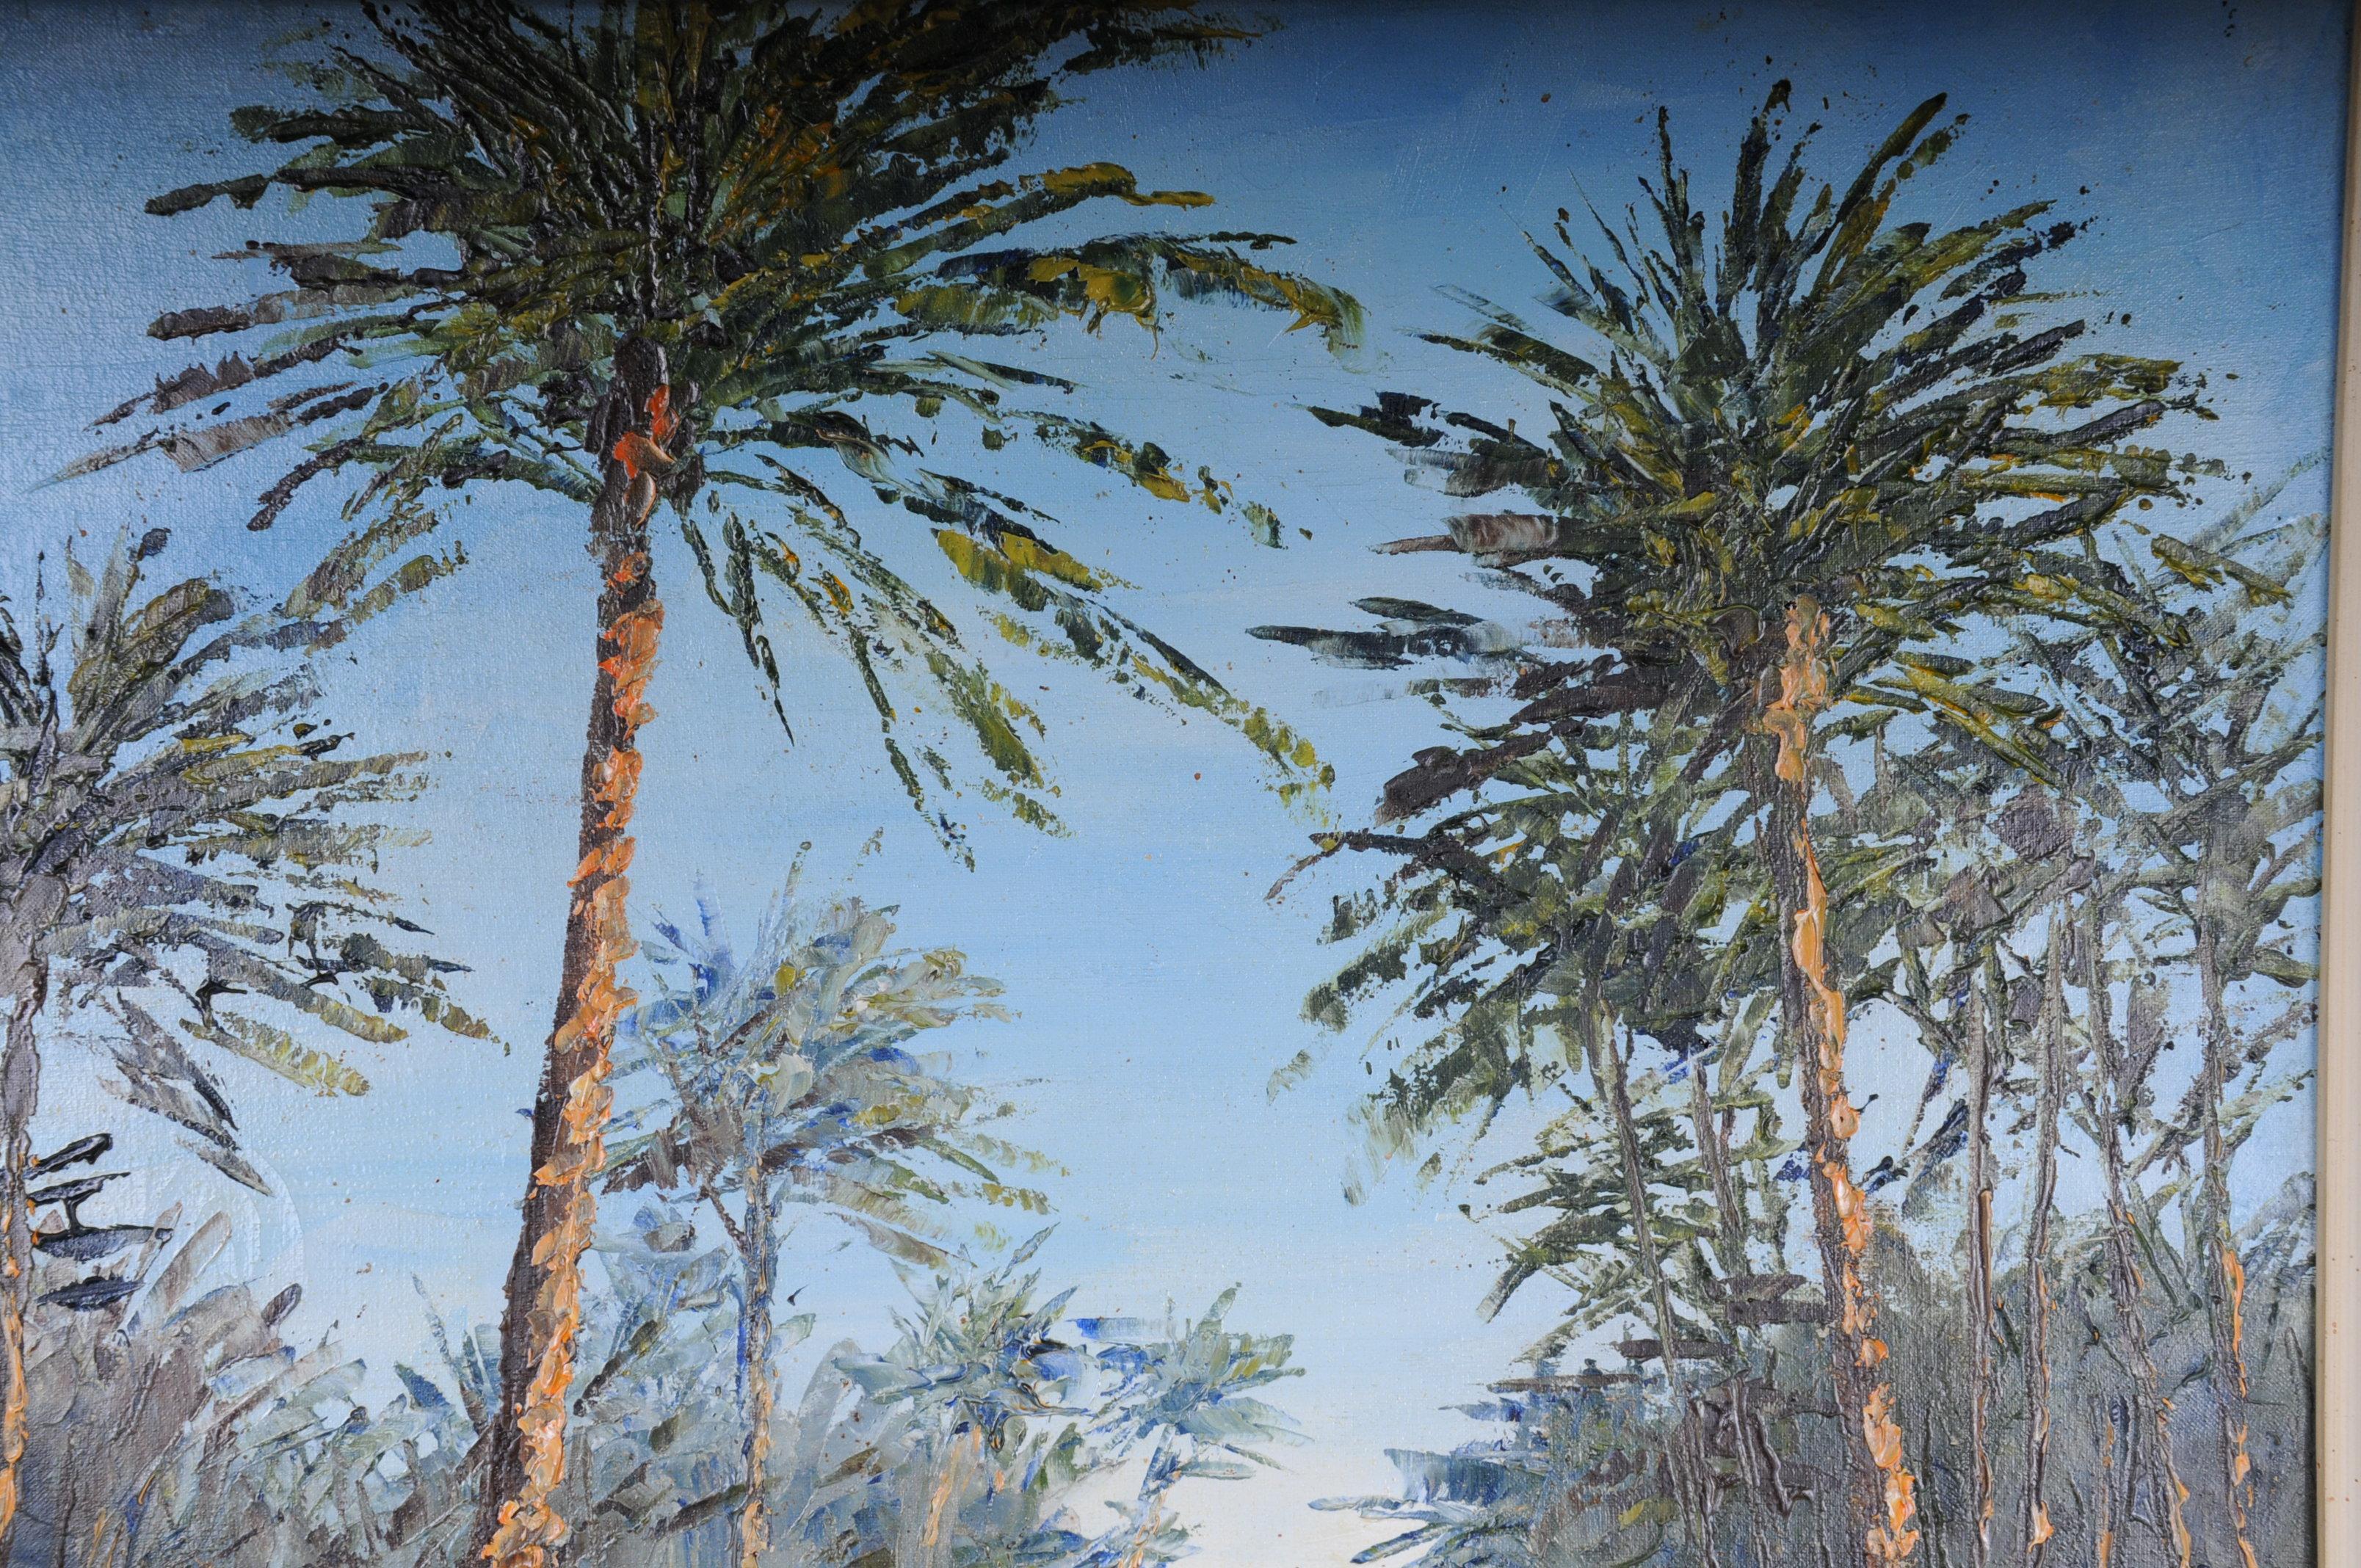 Oriental painter oil painting O. Birkholz

Oil on canvas. Bordered frame. View of a river landscape under palm trees.
Signed O. birchwood.

(S-207).